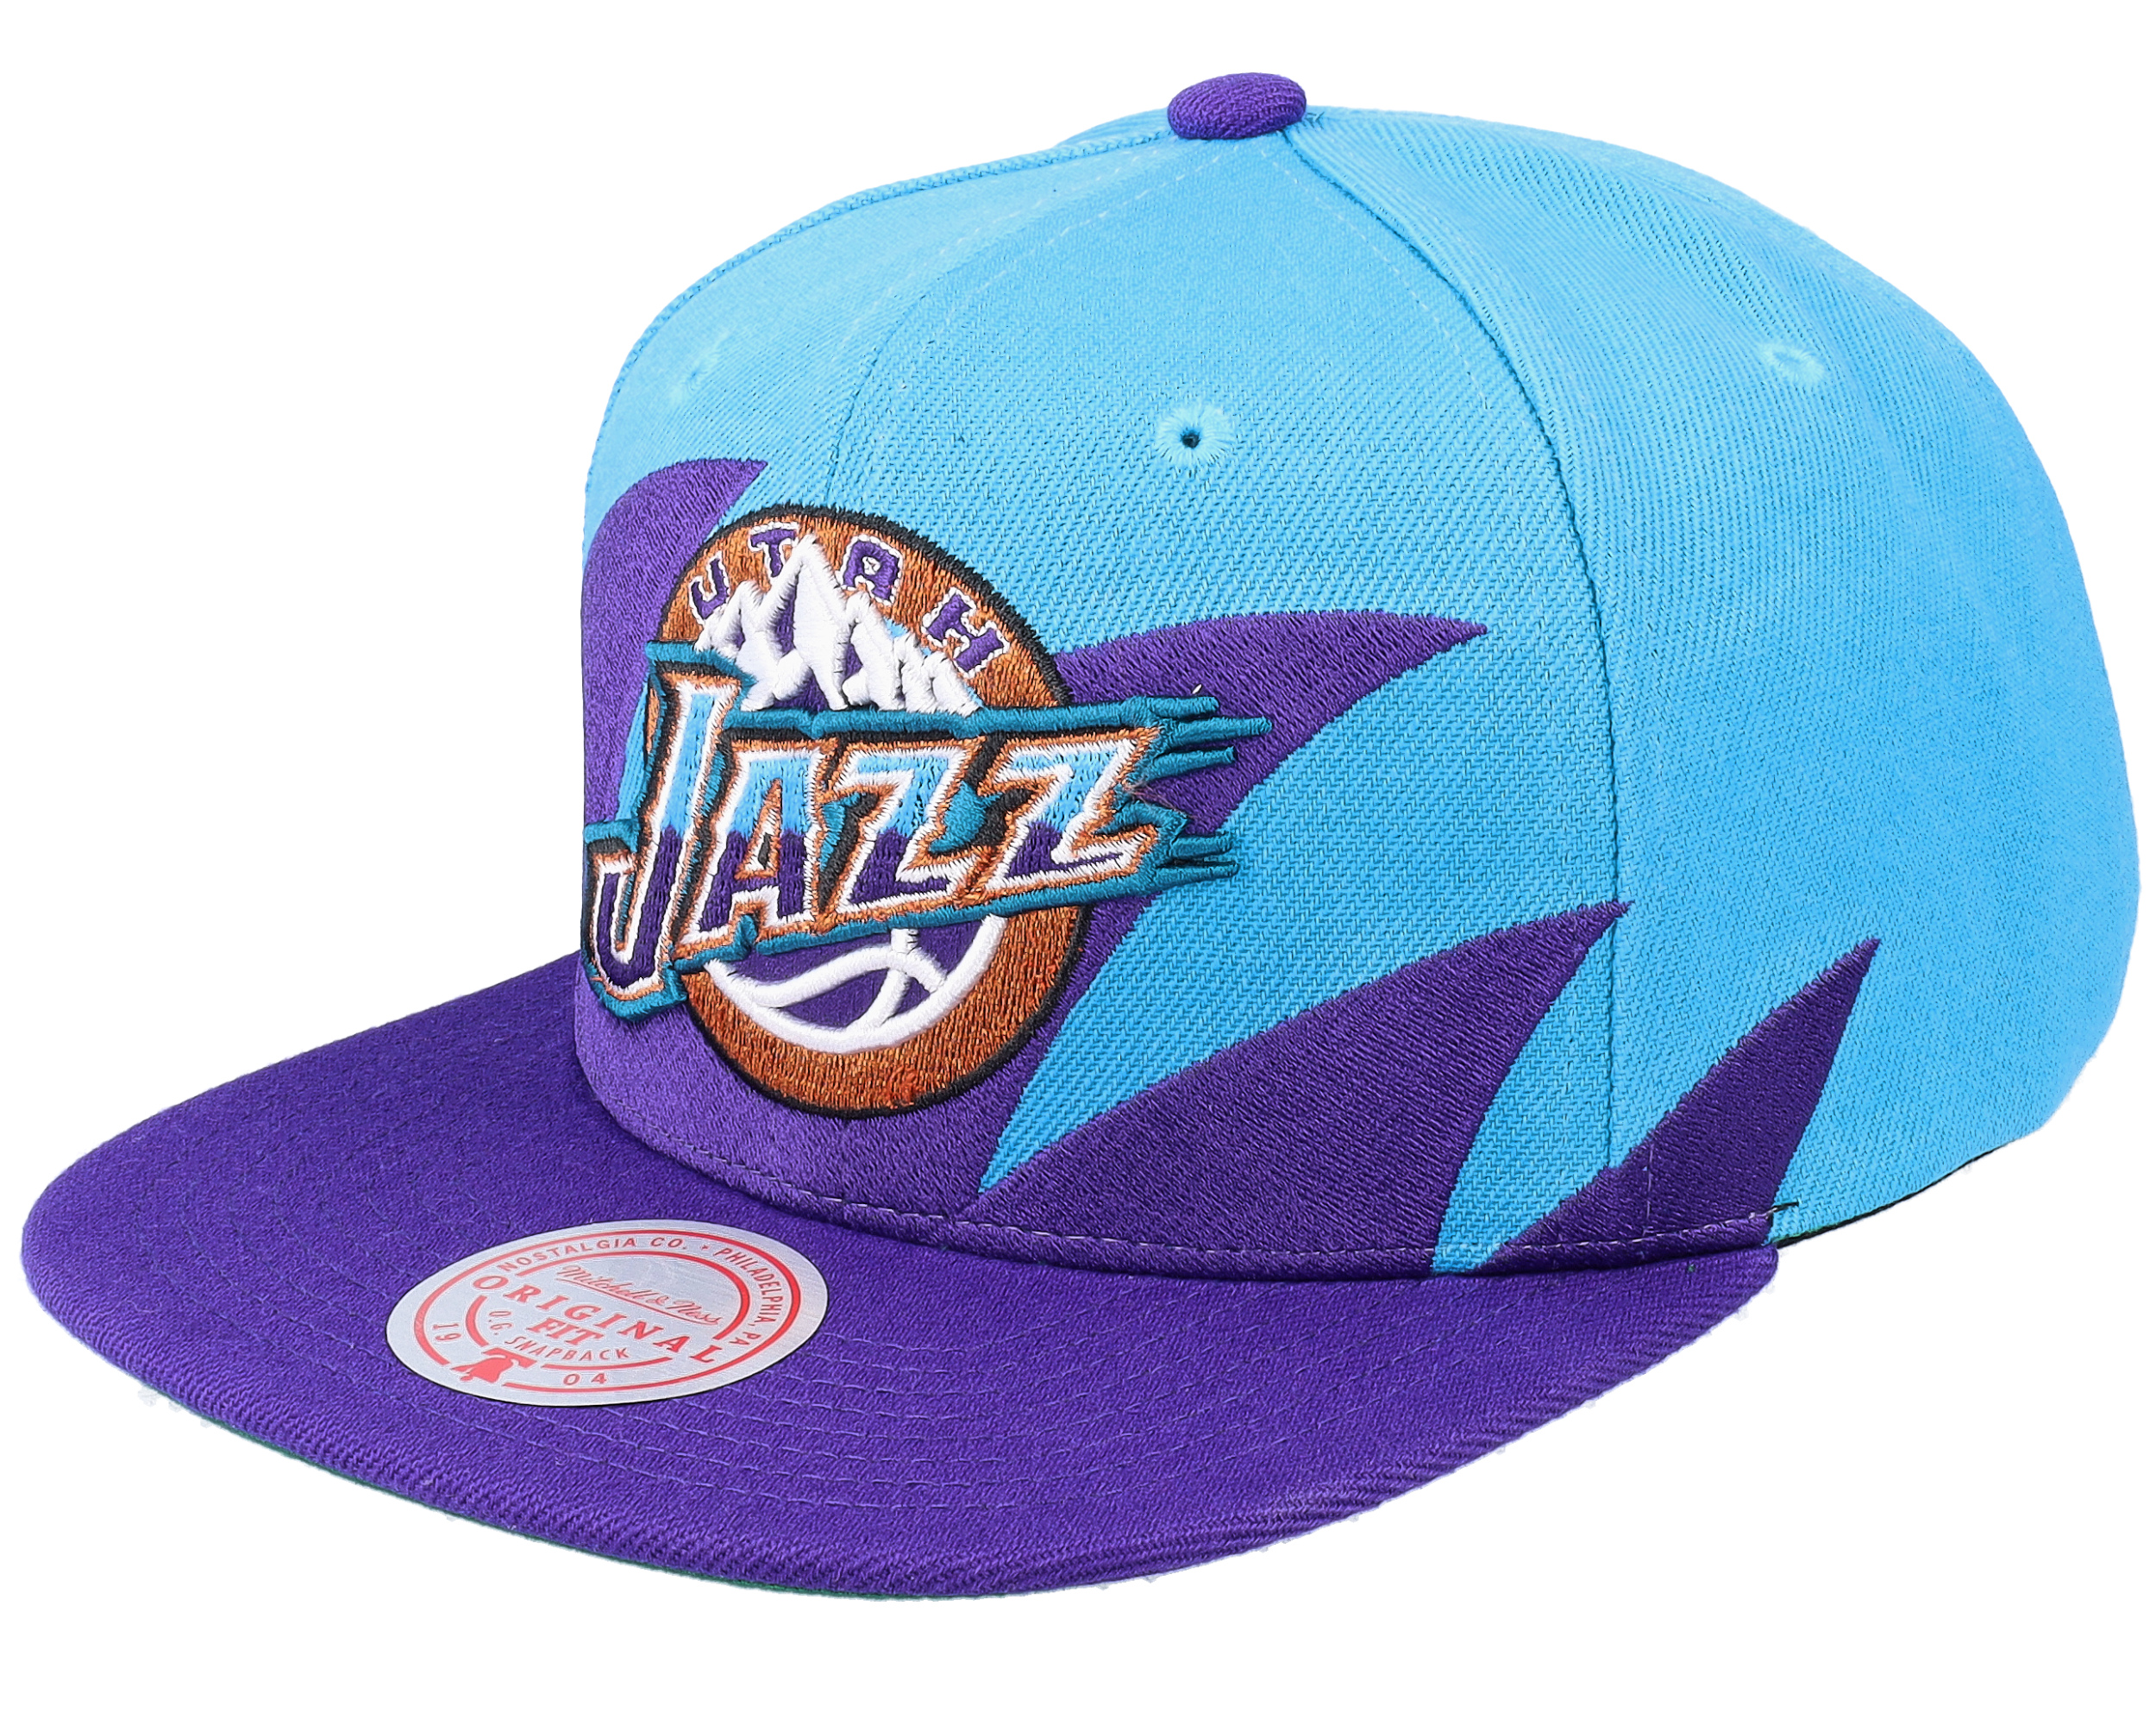 Official Utah Jazz Hats, Snapbacks, Fitted Hats, Beanies